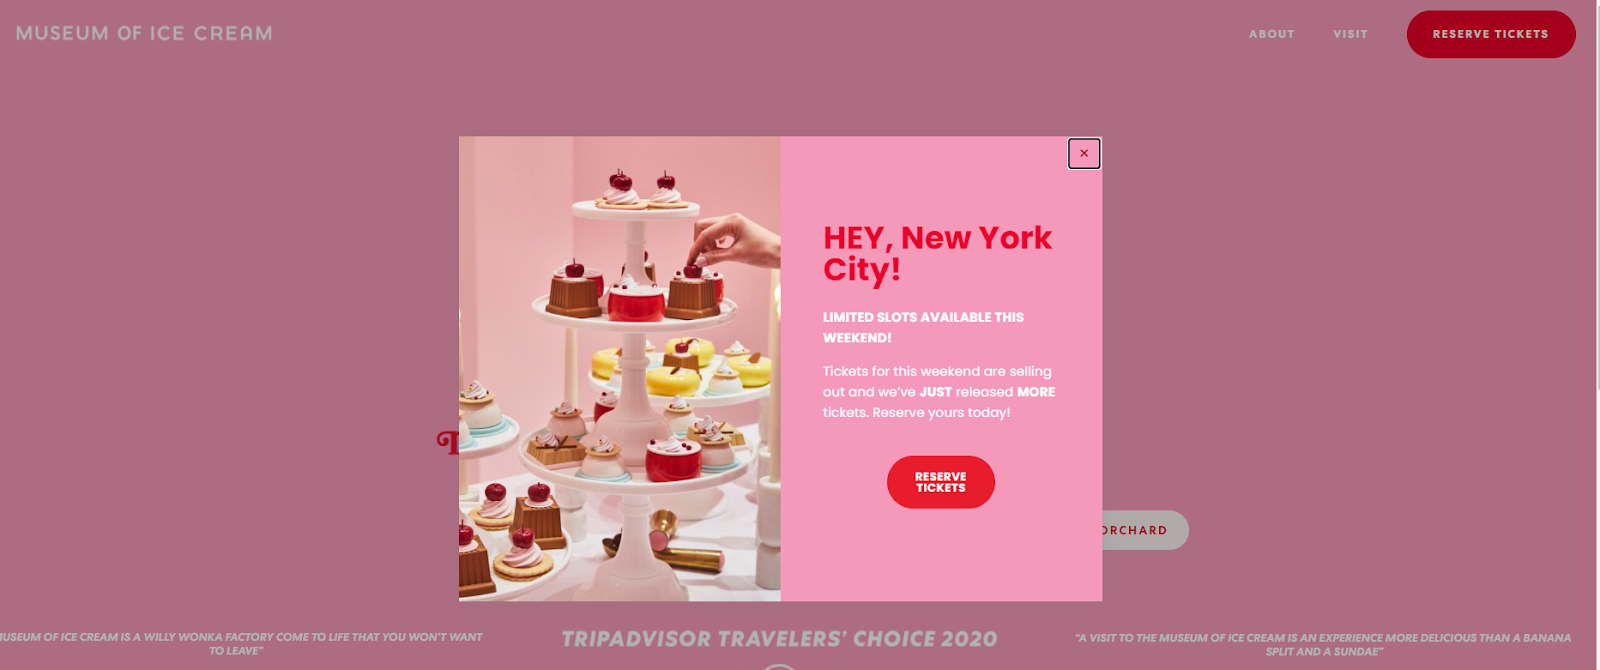 Museum of Ice Cream in New Yorks splash page is a centrally located box that displays an image of deserts on a tray and text about tickets